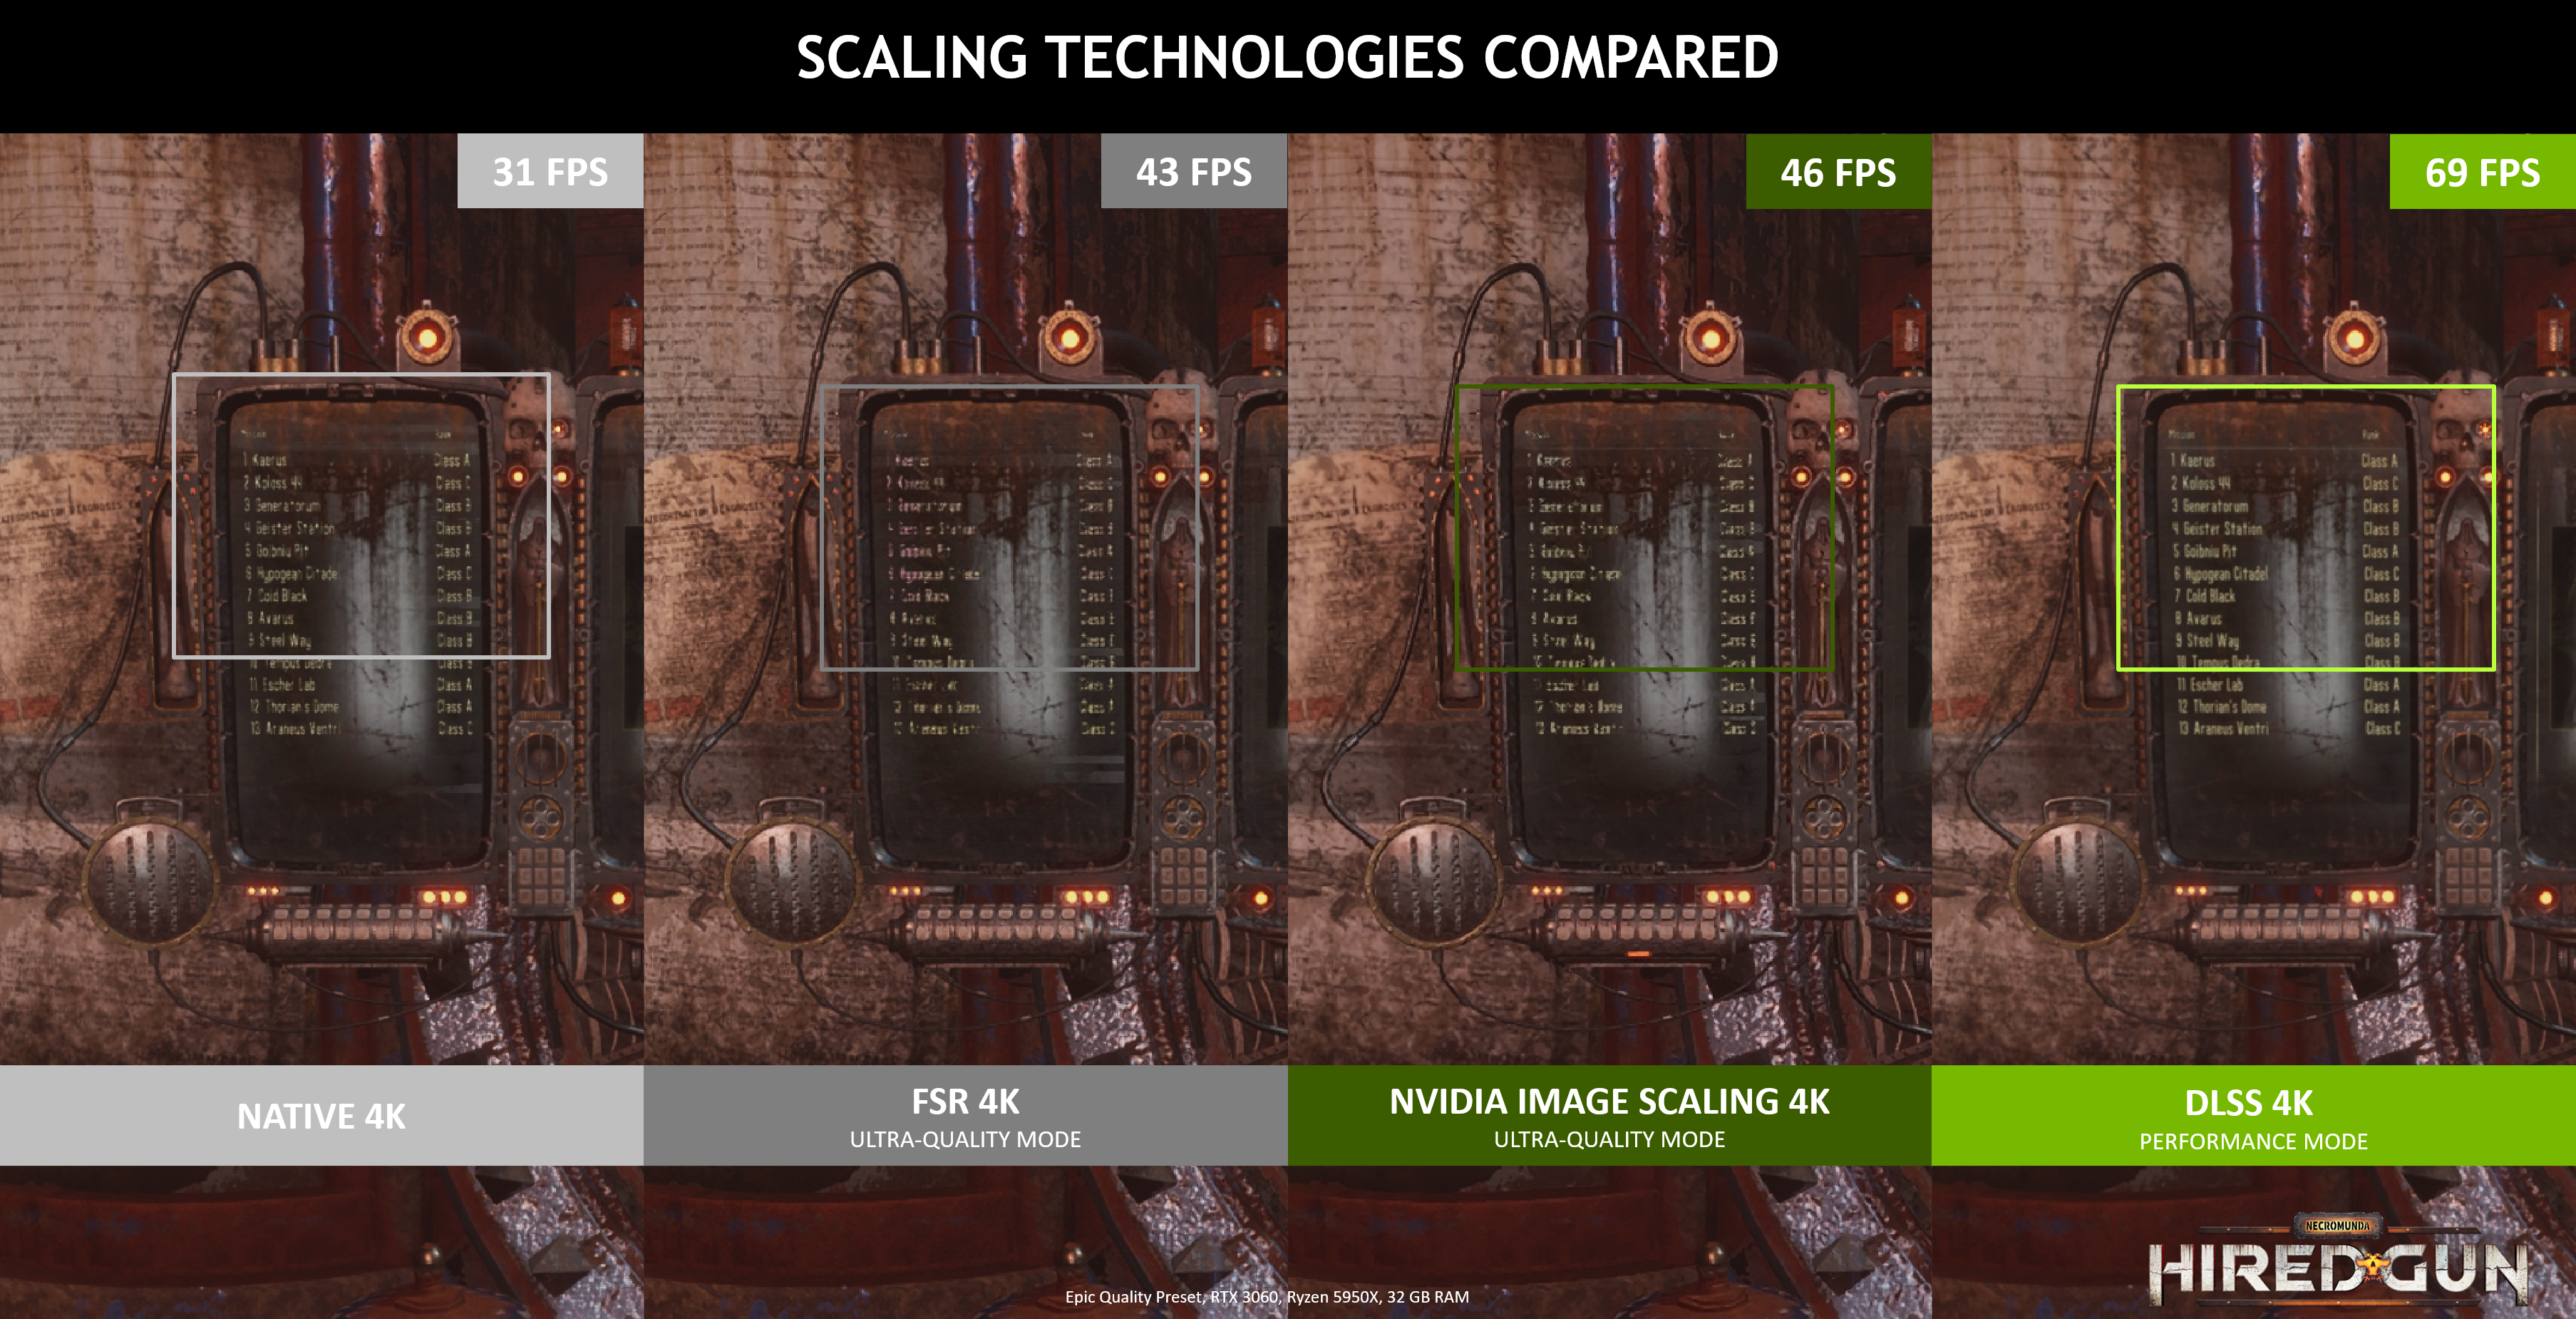 nvidia-dlss-image-scaling-november-2021-necromunda-hired-gun-scaling-techniques-compared.png